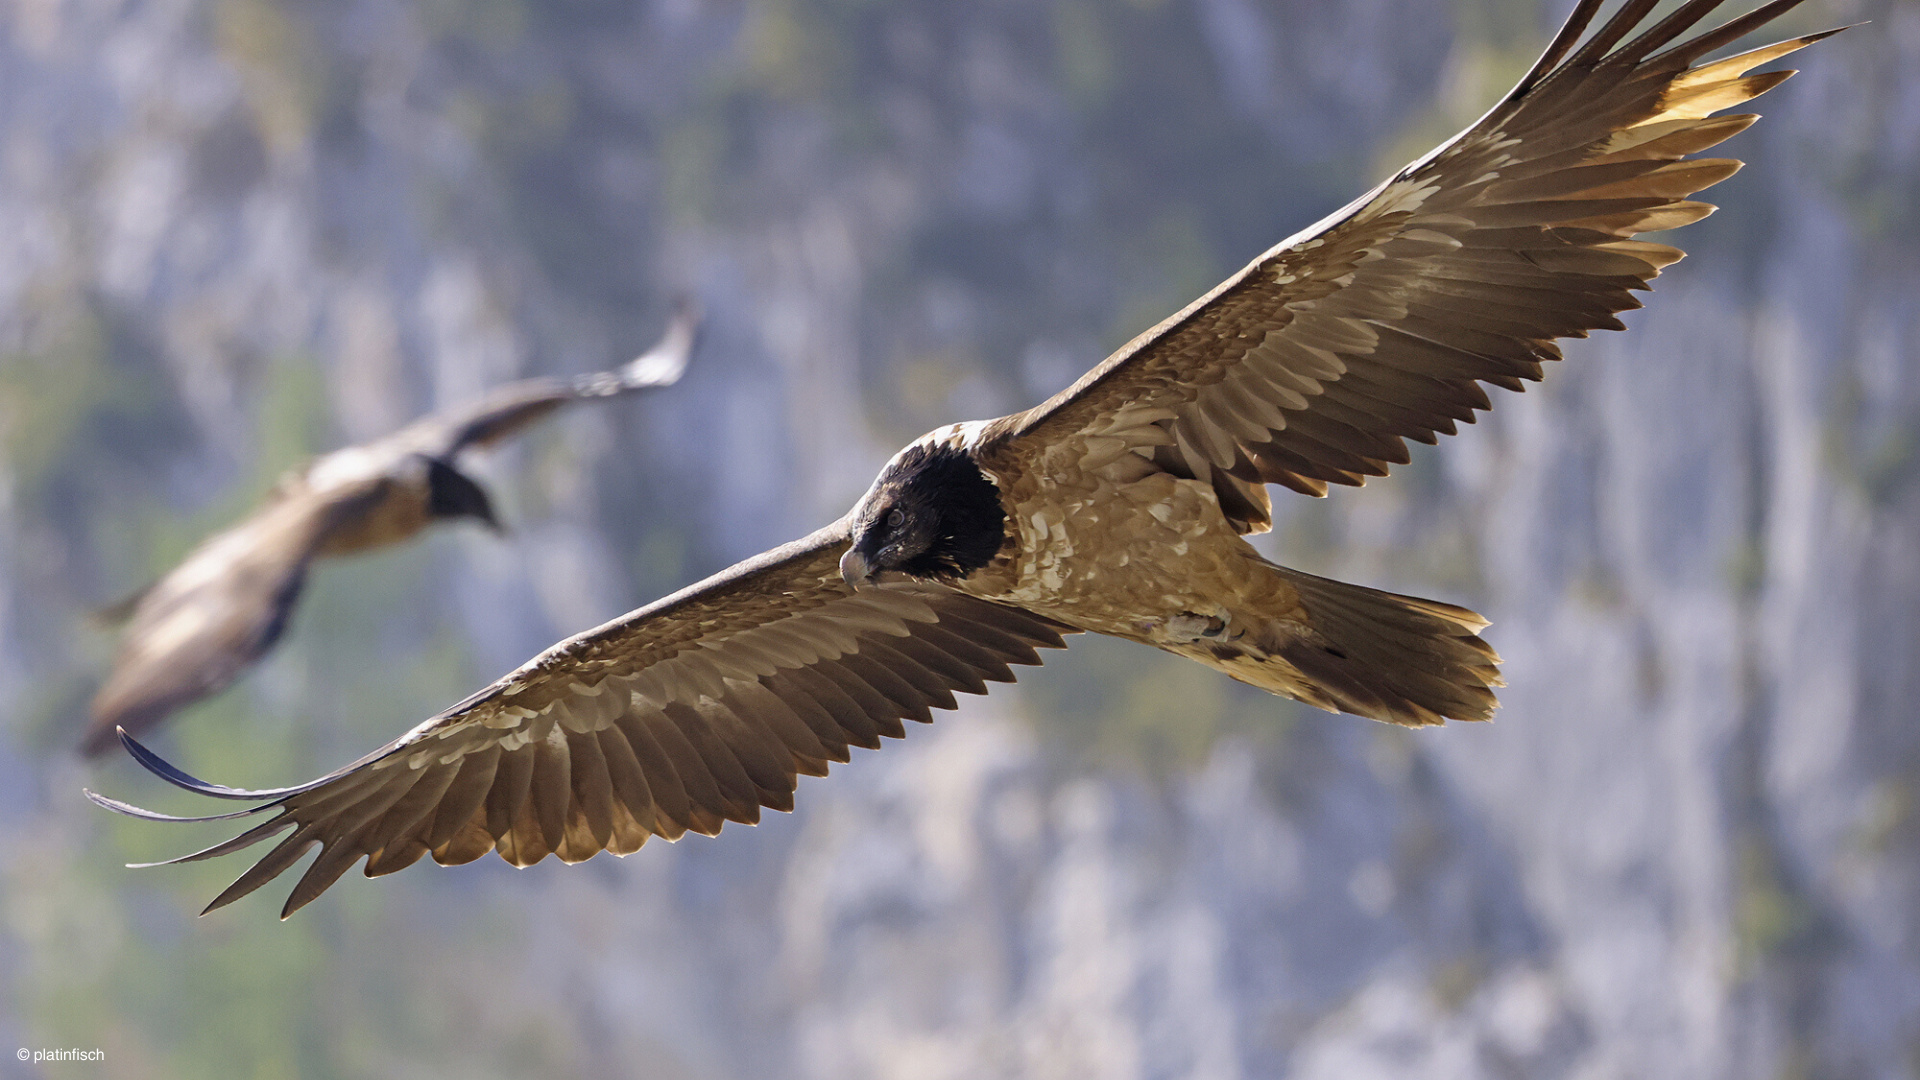 Bearded Vulture, Highlights 2021, Vulture conservation, Bearded Vulture conservation, 1920x1080 Full HD Desktop